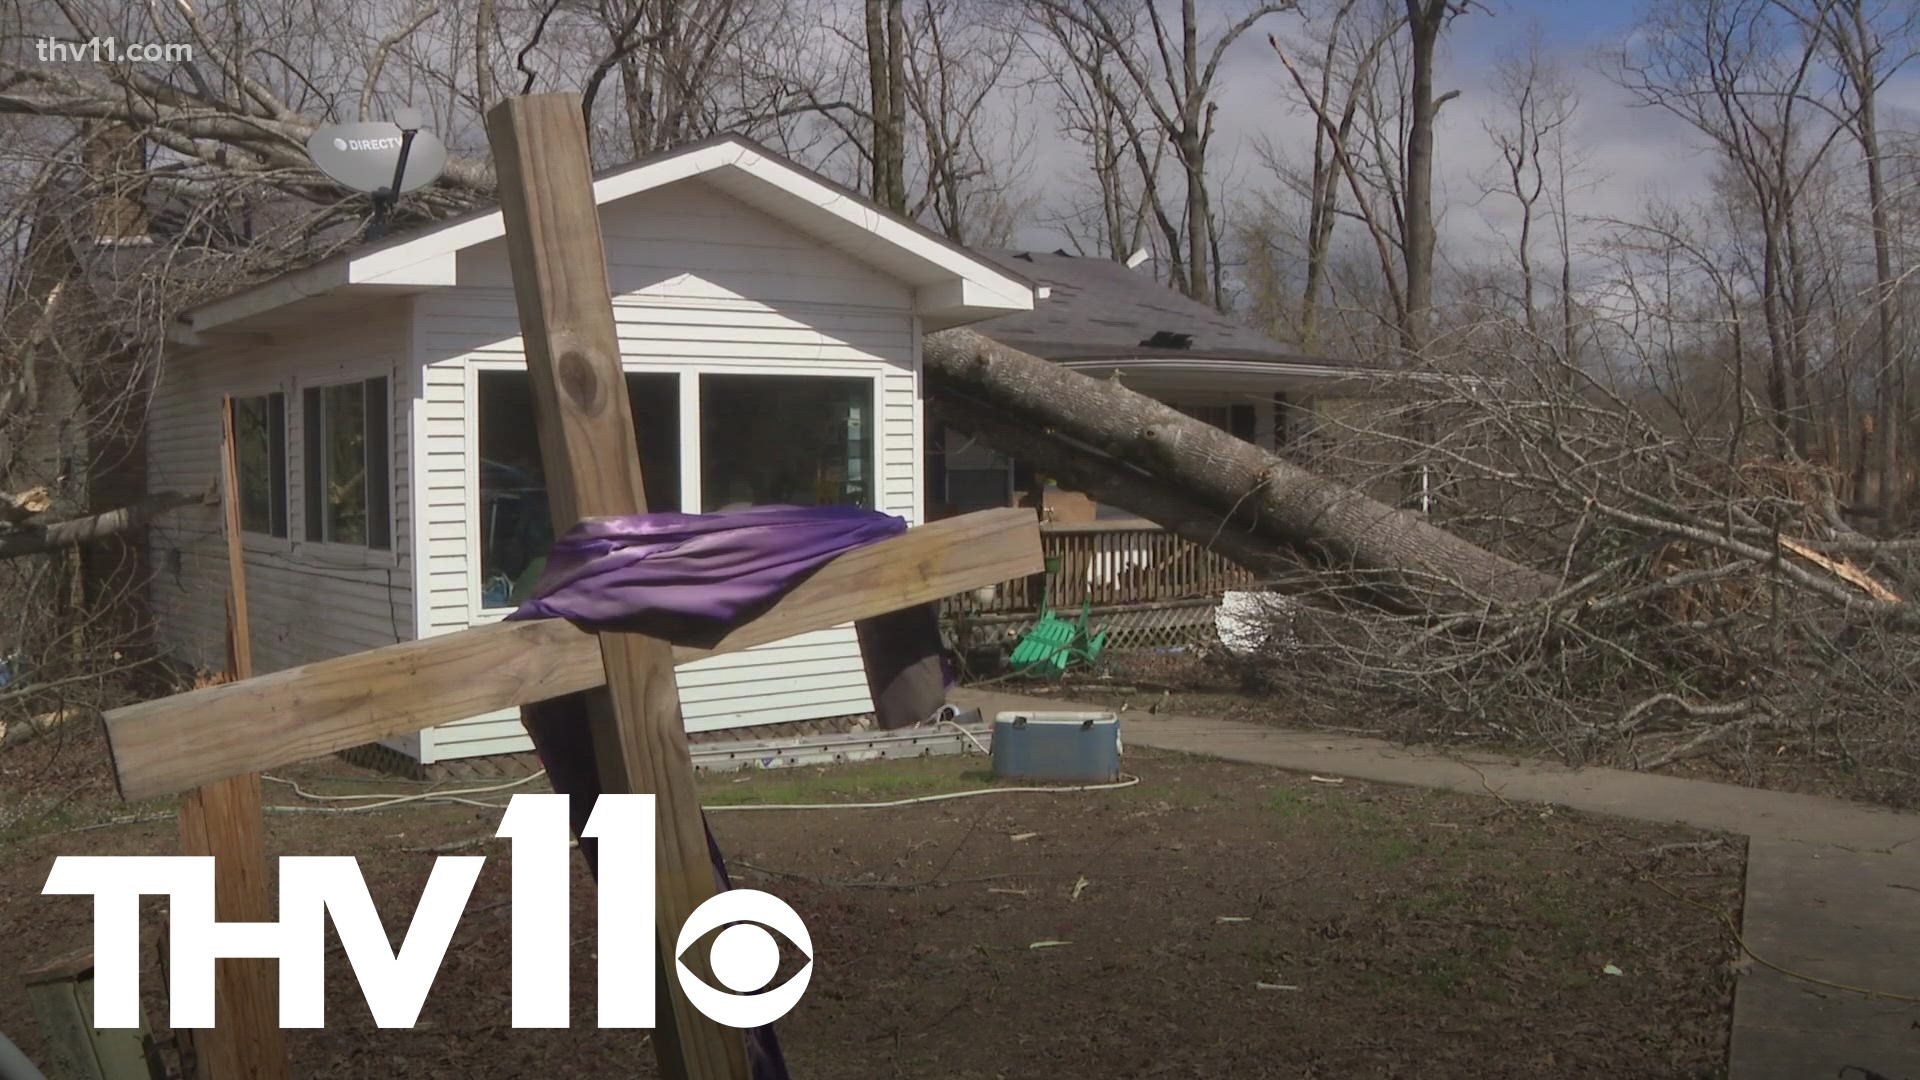 Gov. Sarah Huckabee Sanders issued an executive order for communities like Kirby, declaring areas that were hit by this week's storm to be disaster areas.